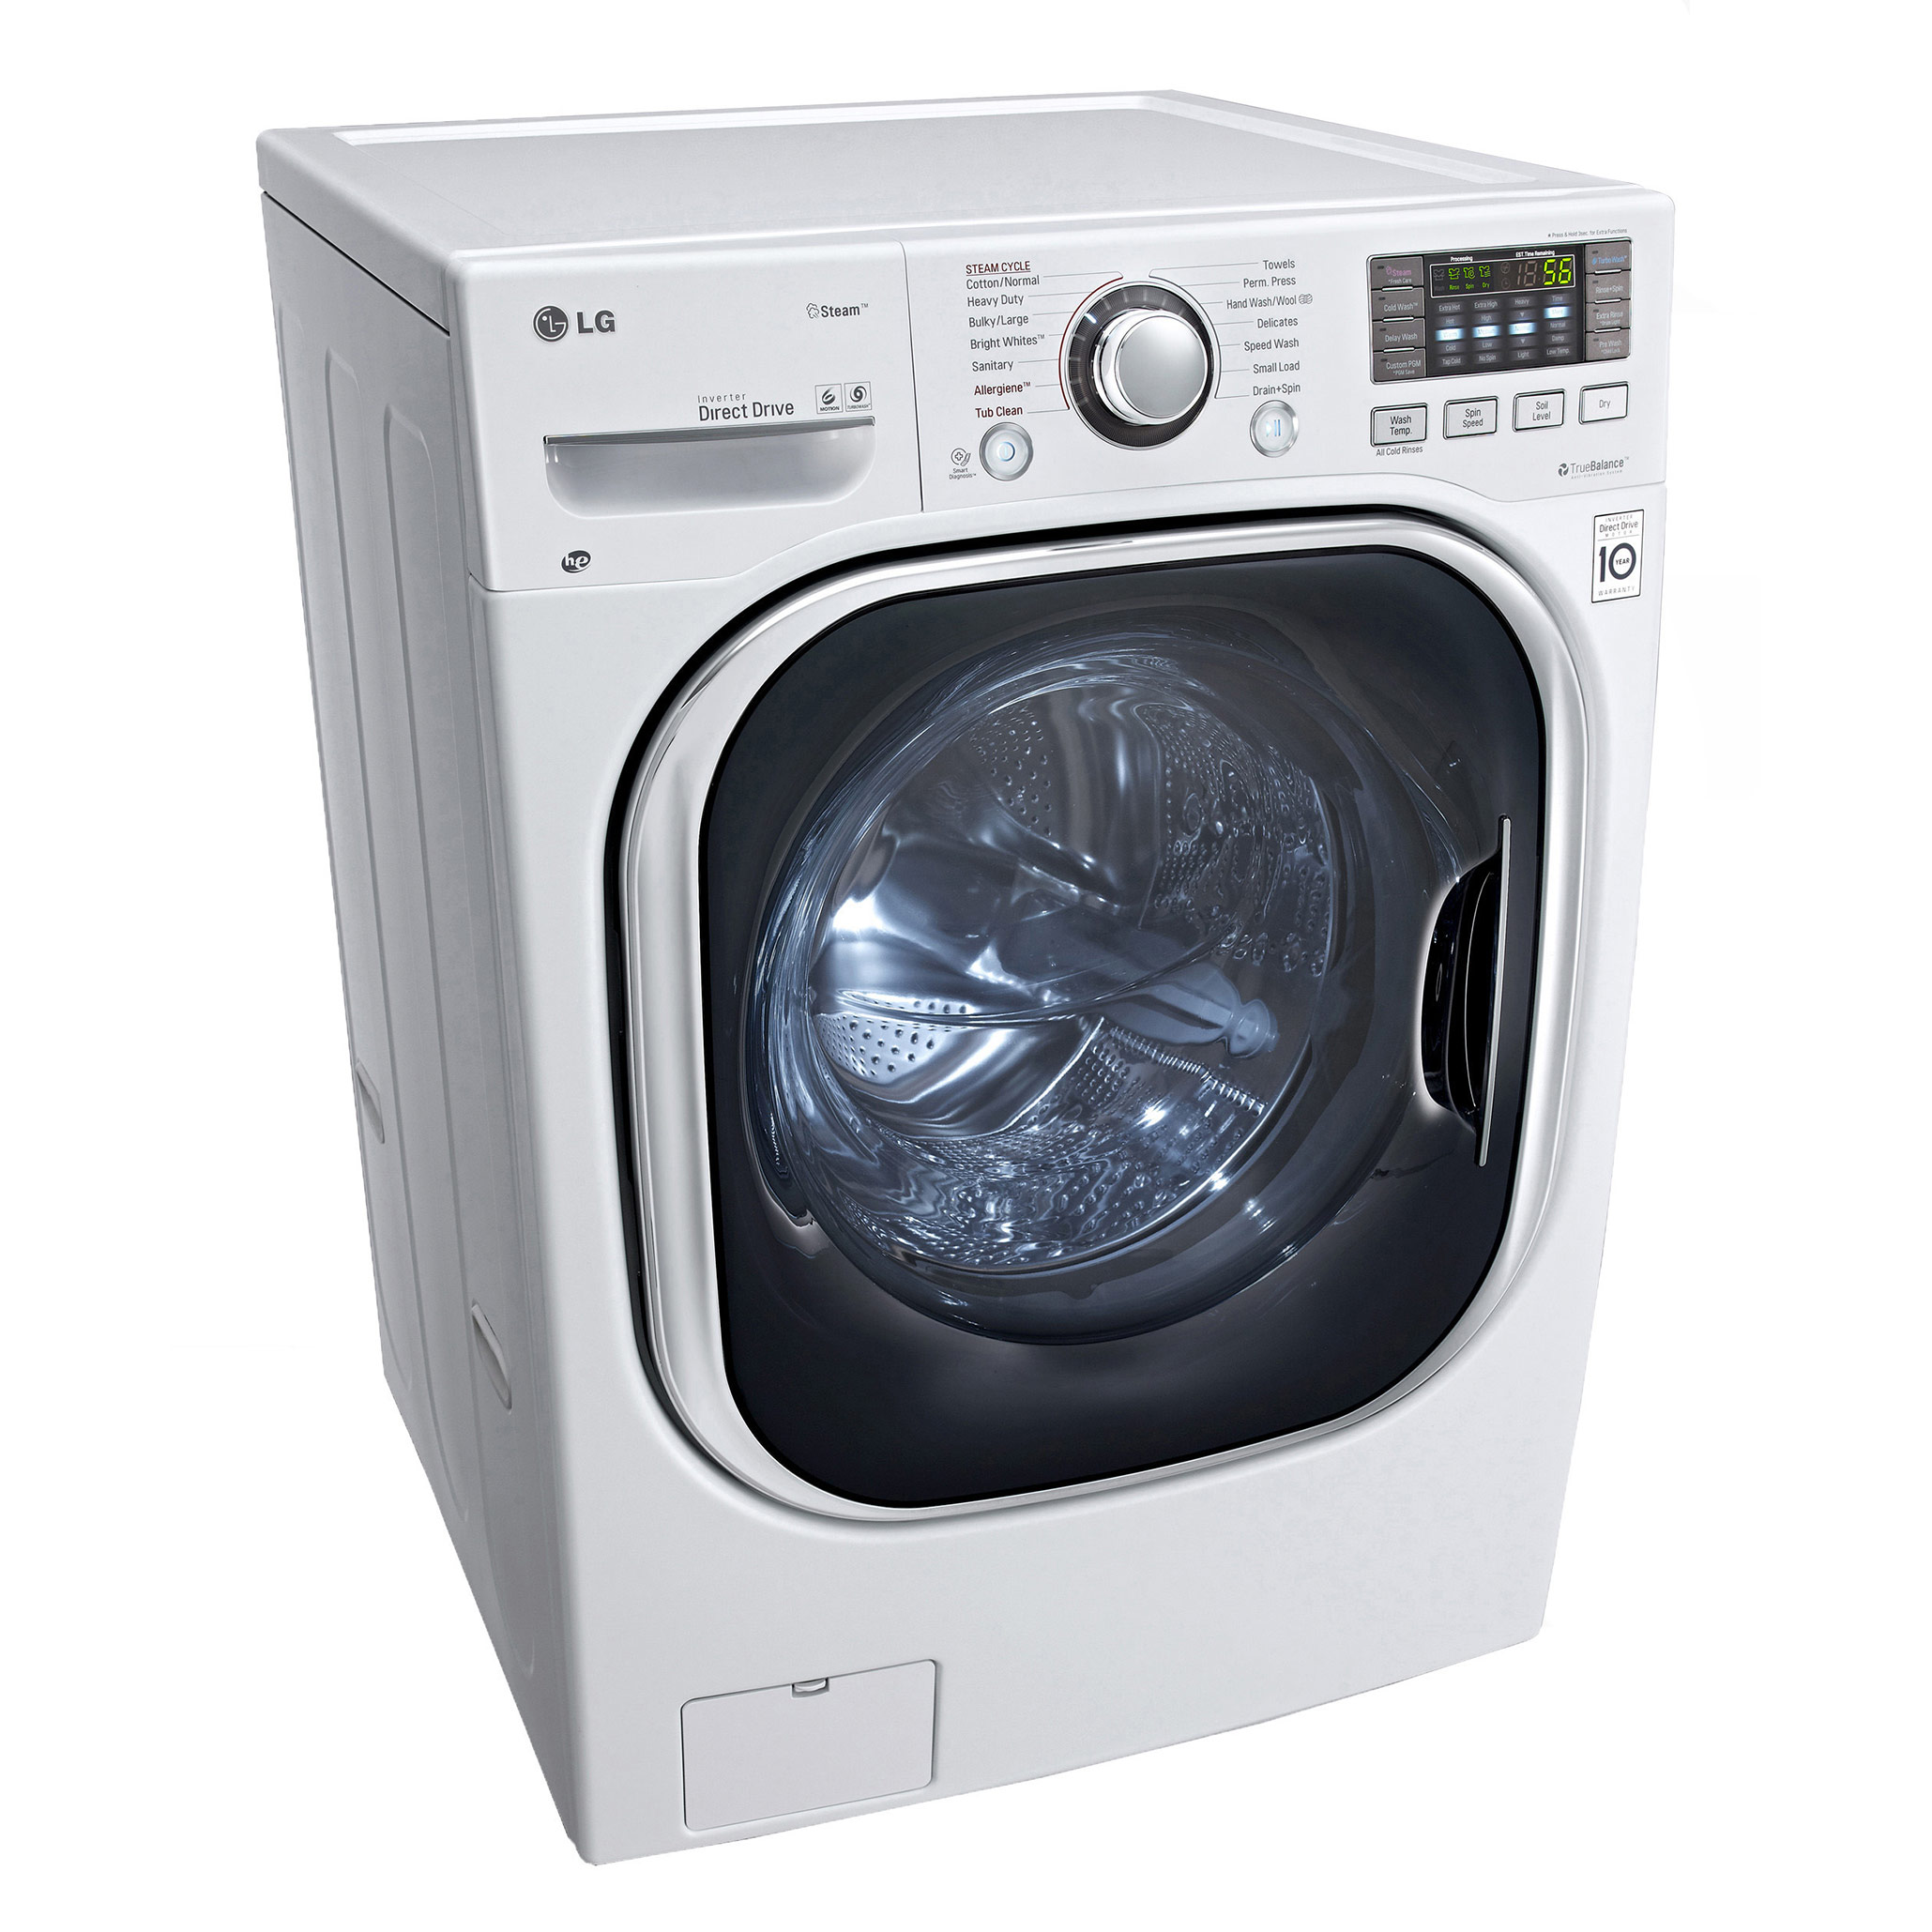 LG WM3997HWA | All in One Washer Dryer Combo | LGWasherDryer.com Portable All In One Washer And Dryer